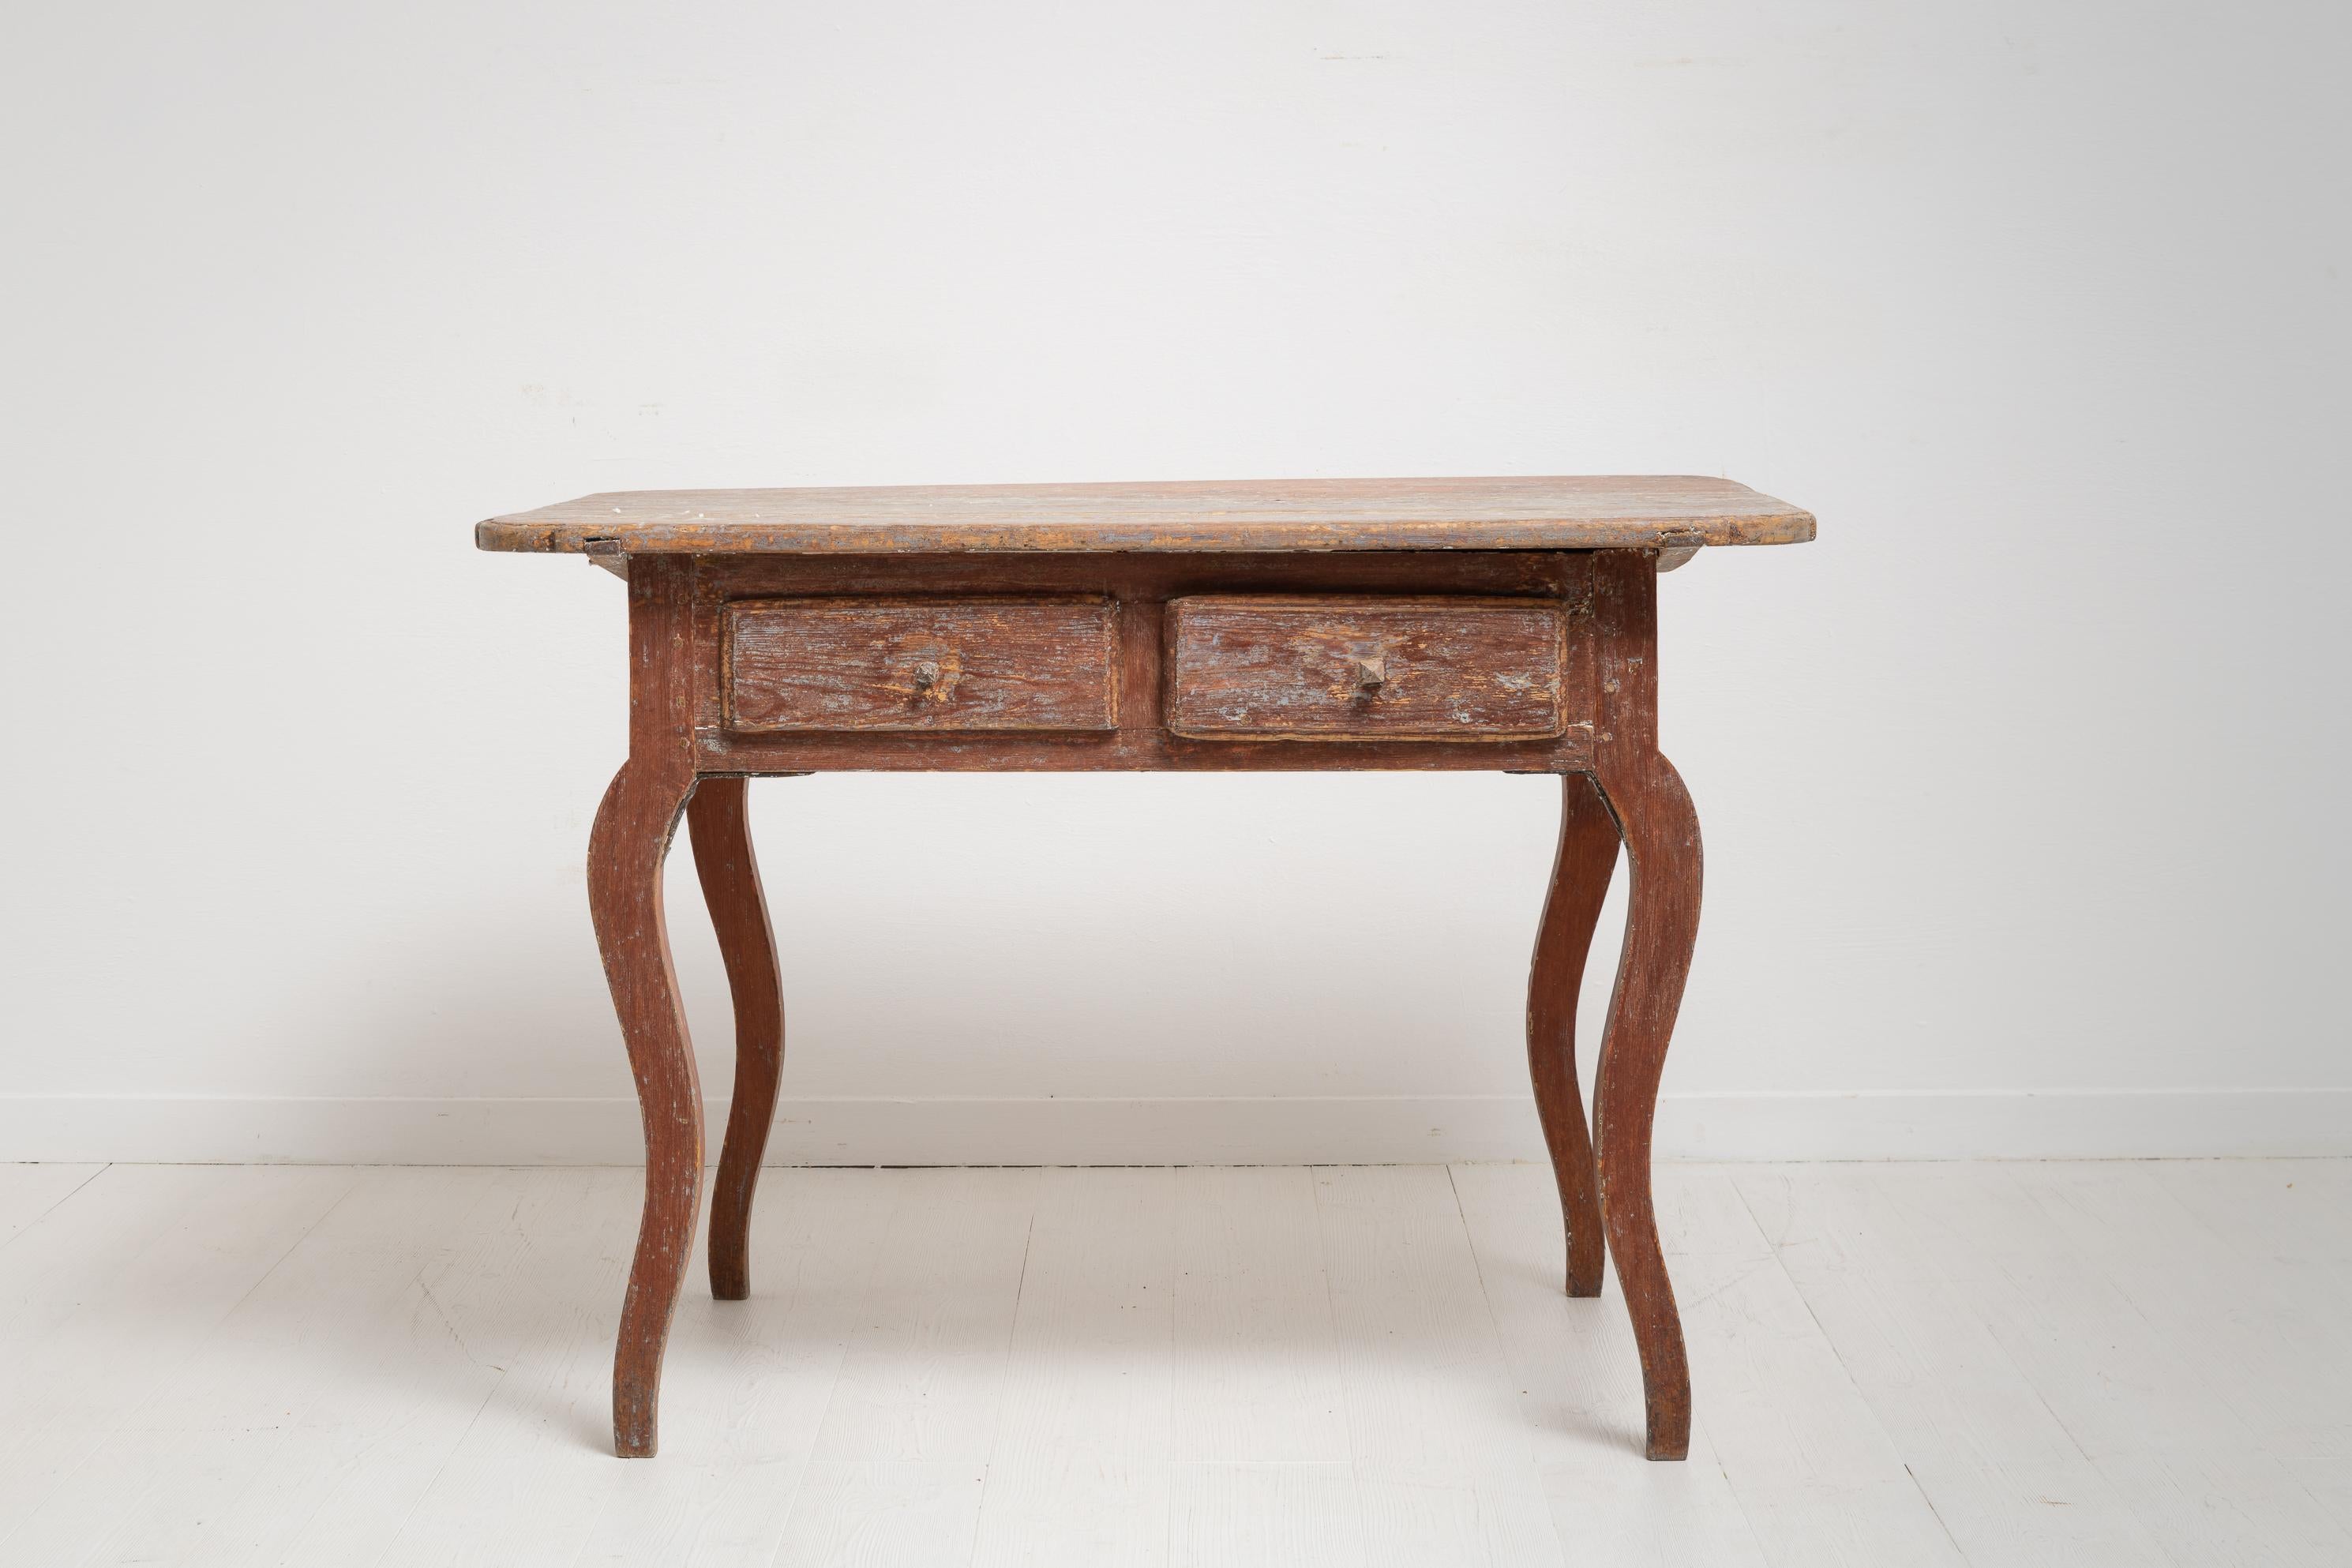 Hand-Crafted Unusual 18th Century Swedish Genuine Rococo Country Table